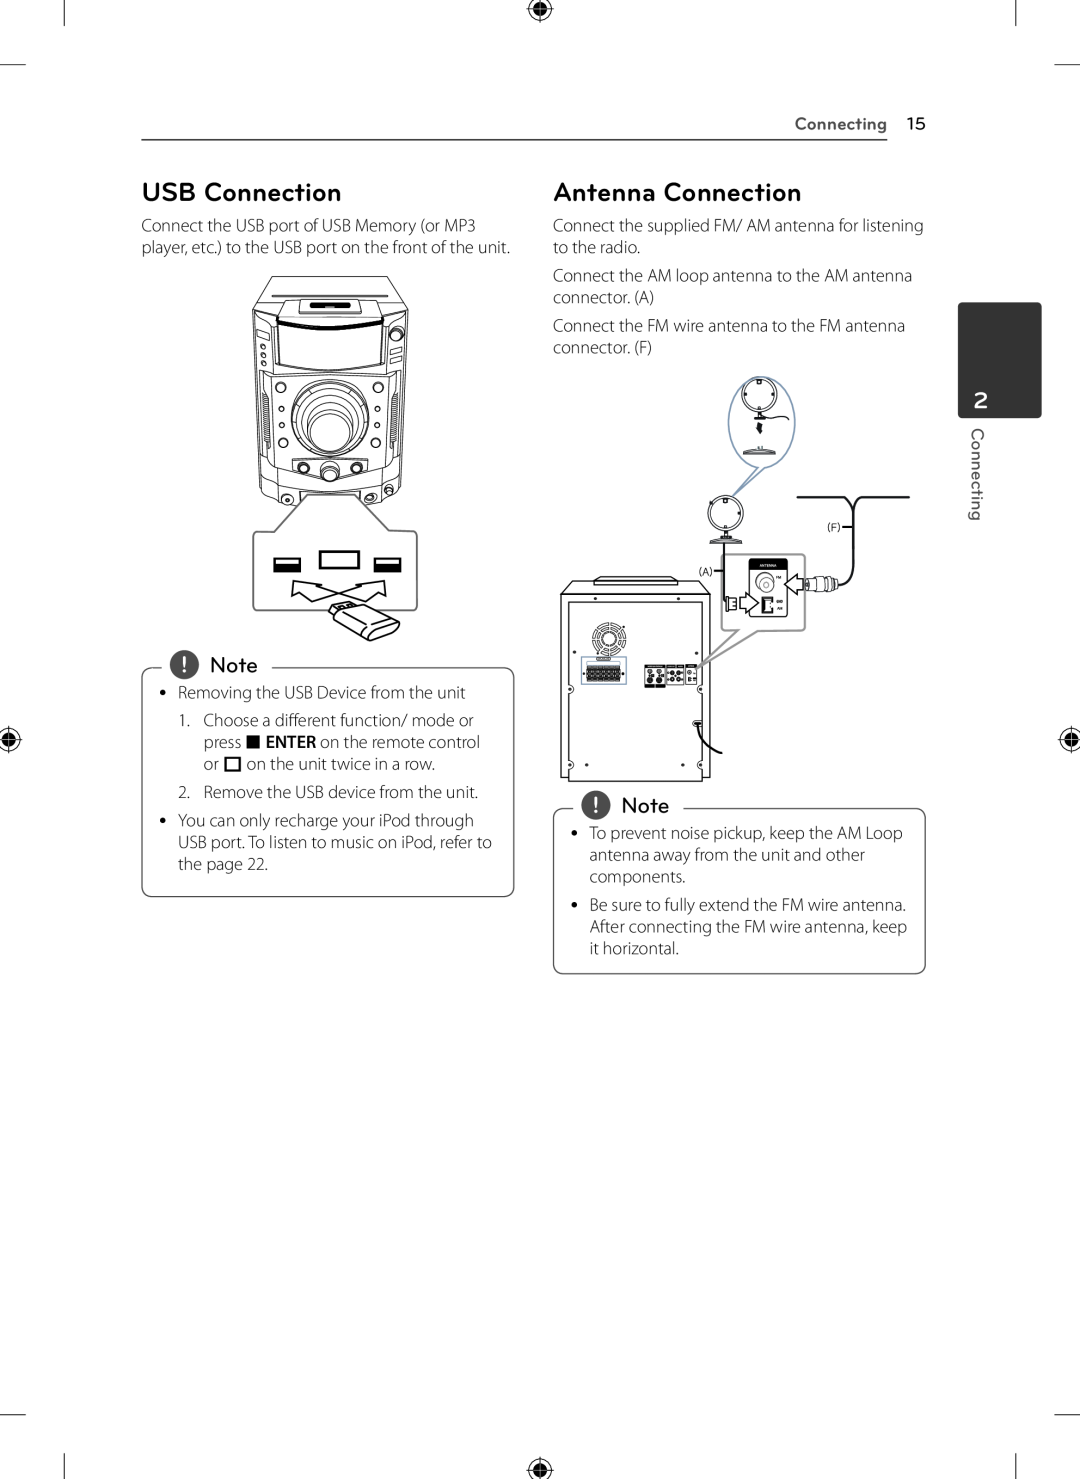 LG Electronics KSM1506 owner manual USB Connection, Antenna Connection, Connecting 